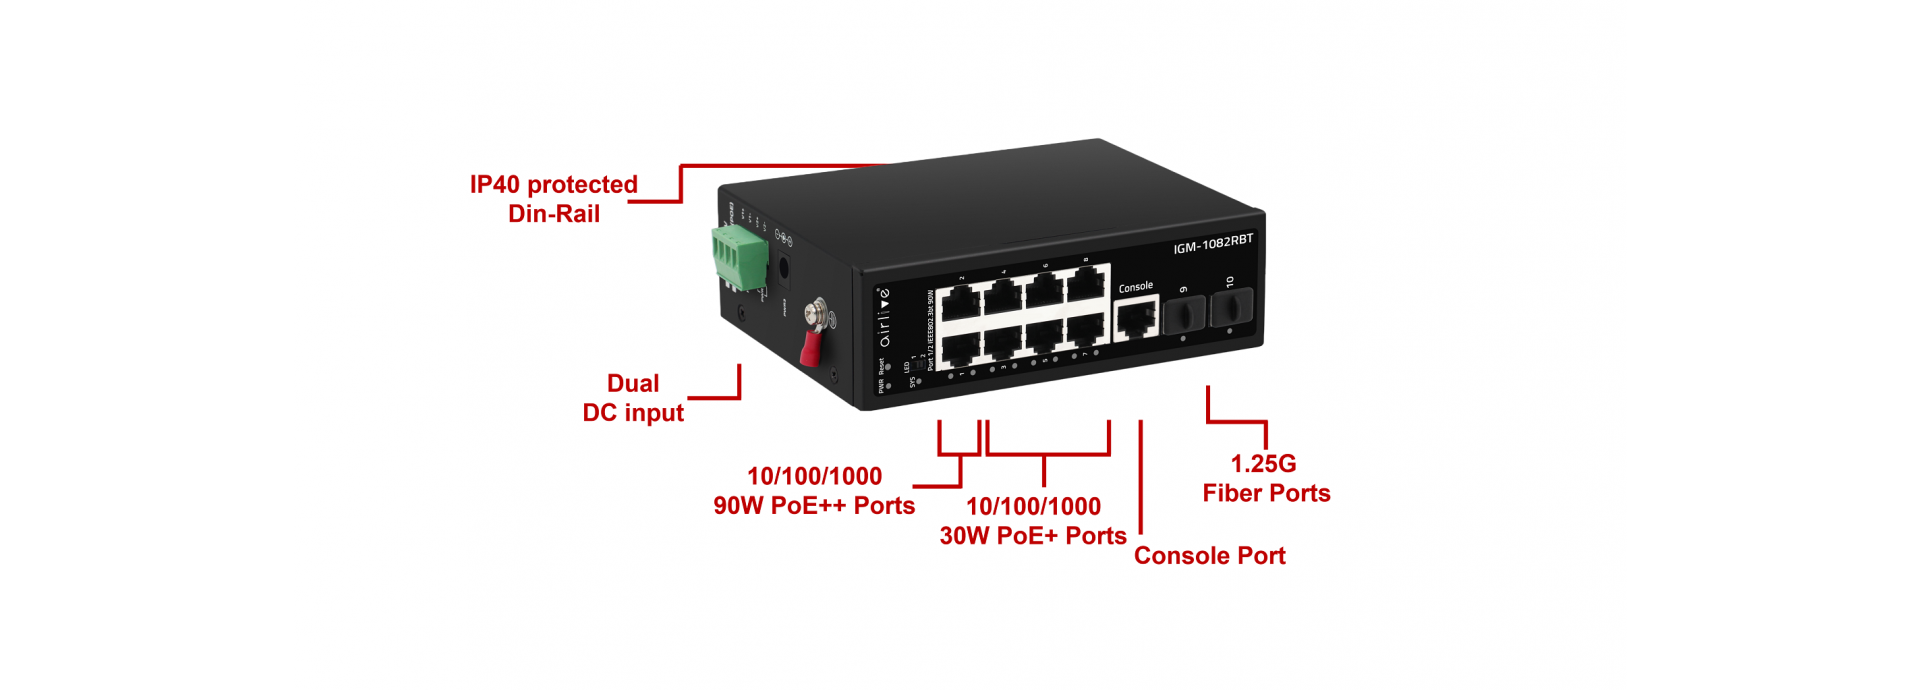 Reliable Industrial-grade Managed POE Switch for extreme environment With VLAN and QoS